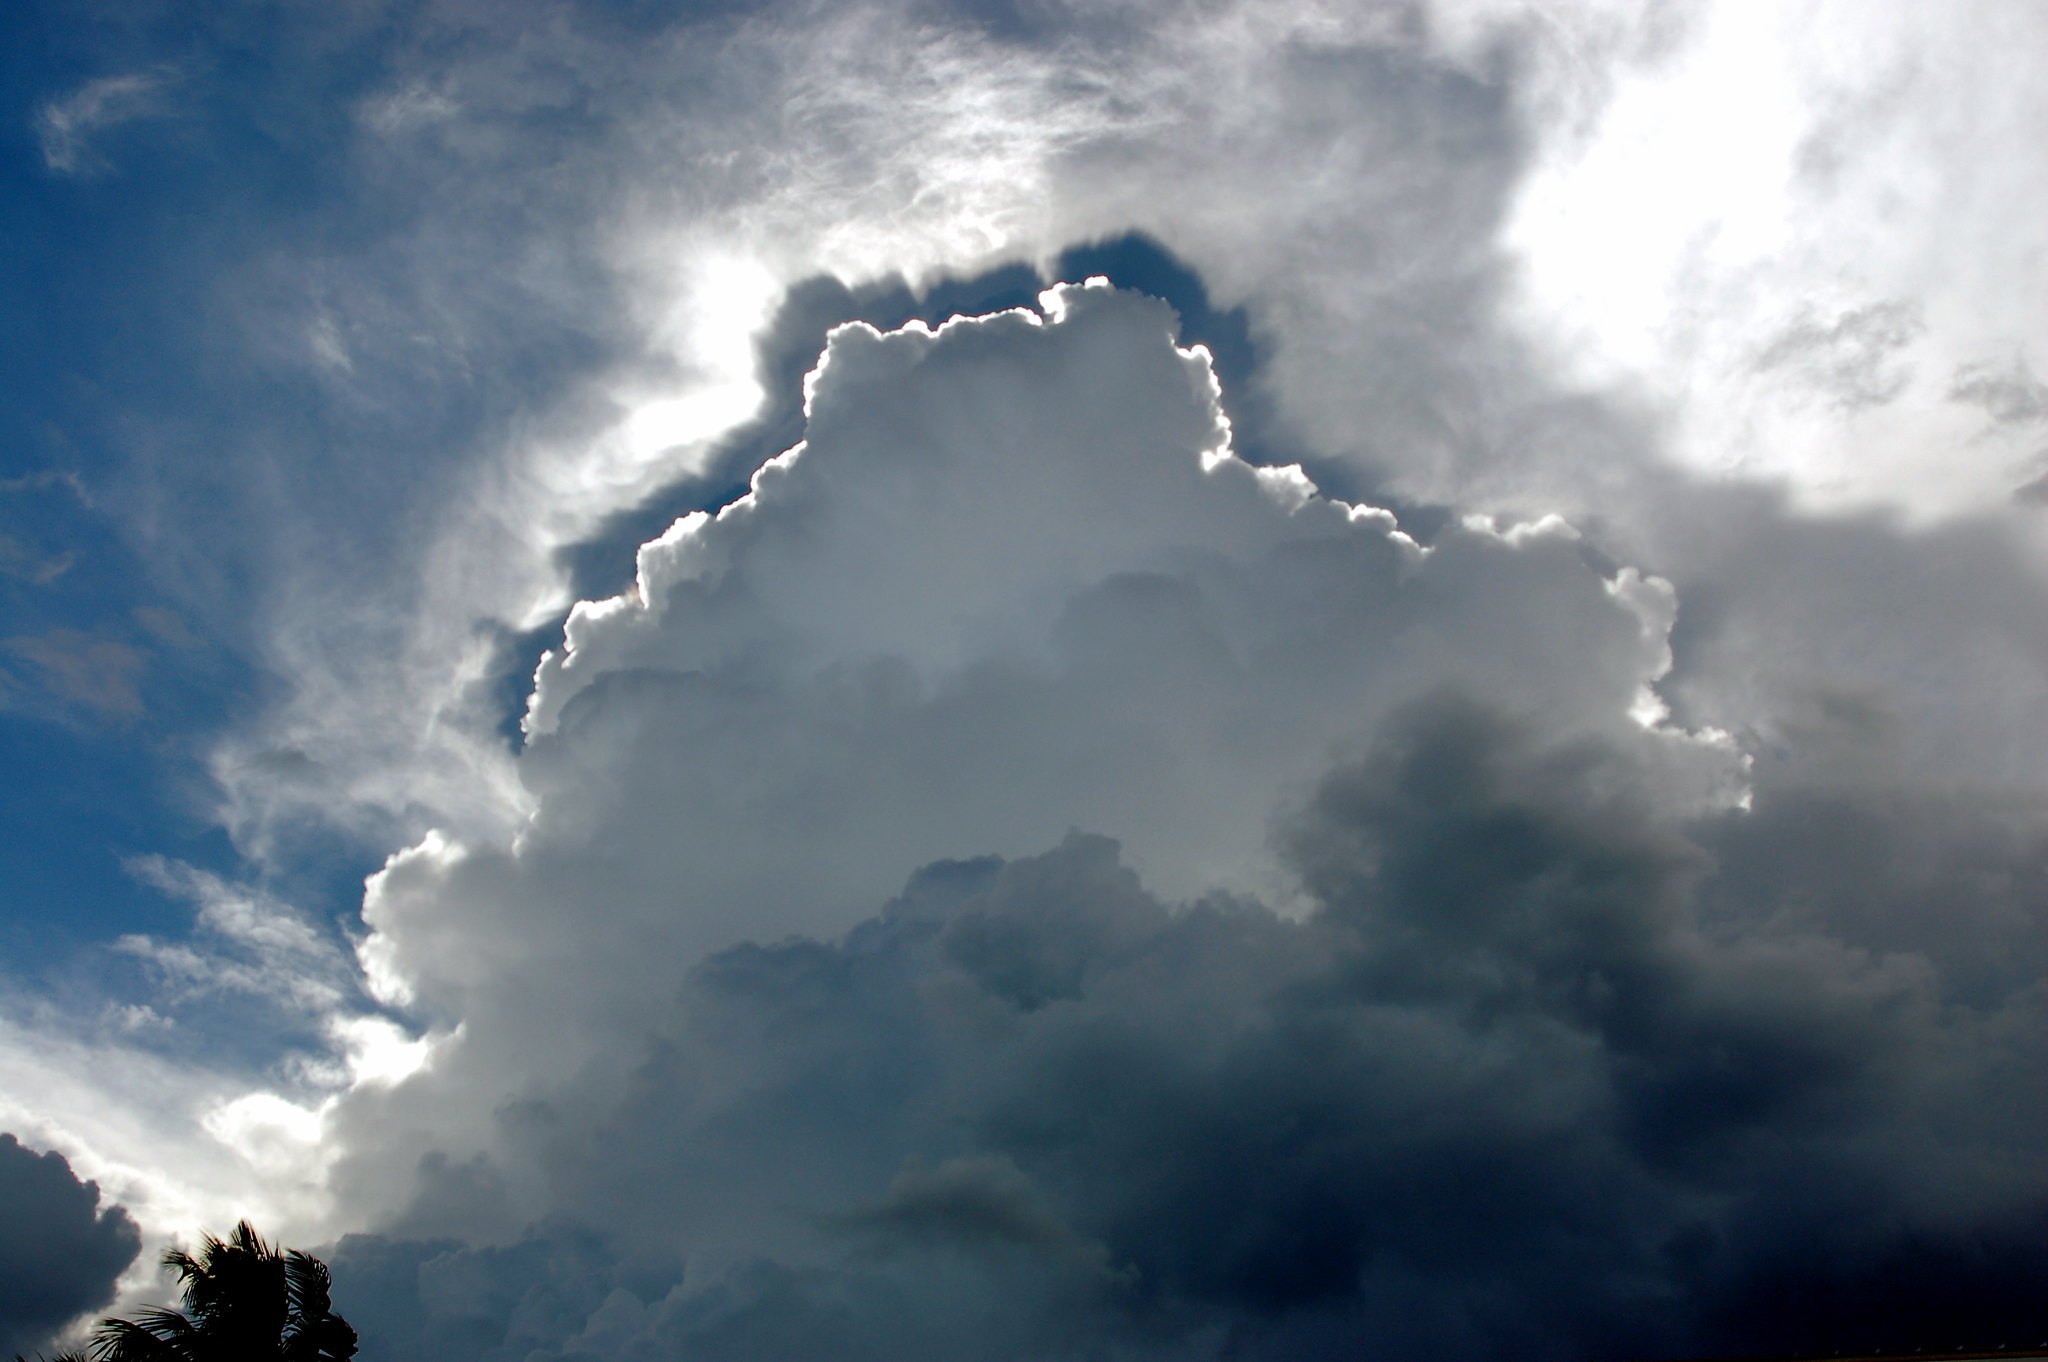 Image of clouds for cloud-hosting services article.